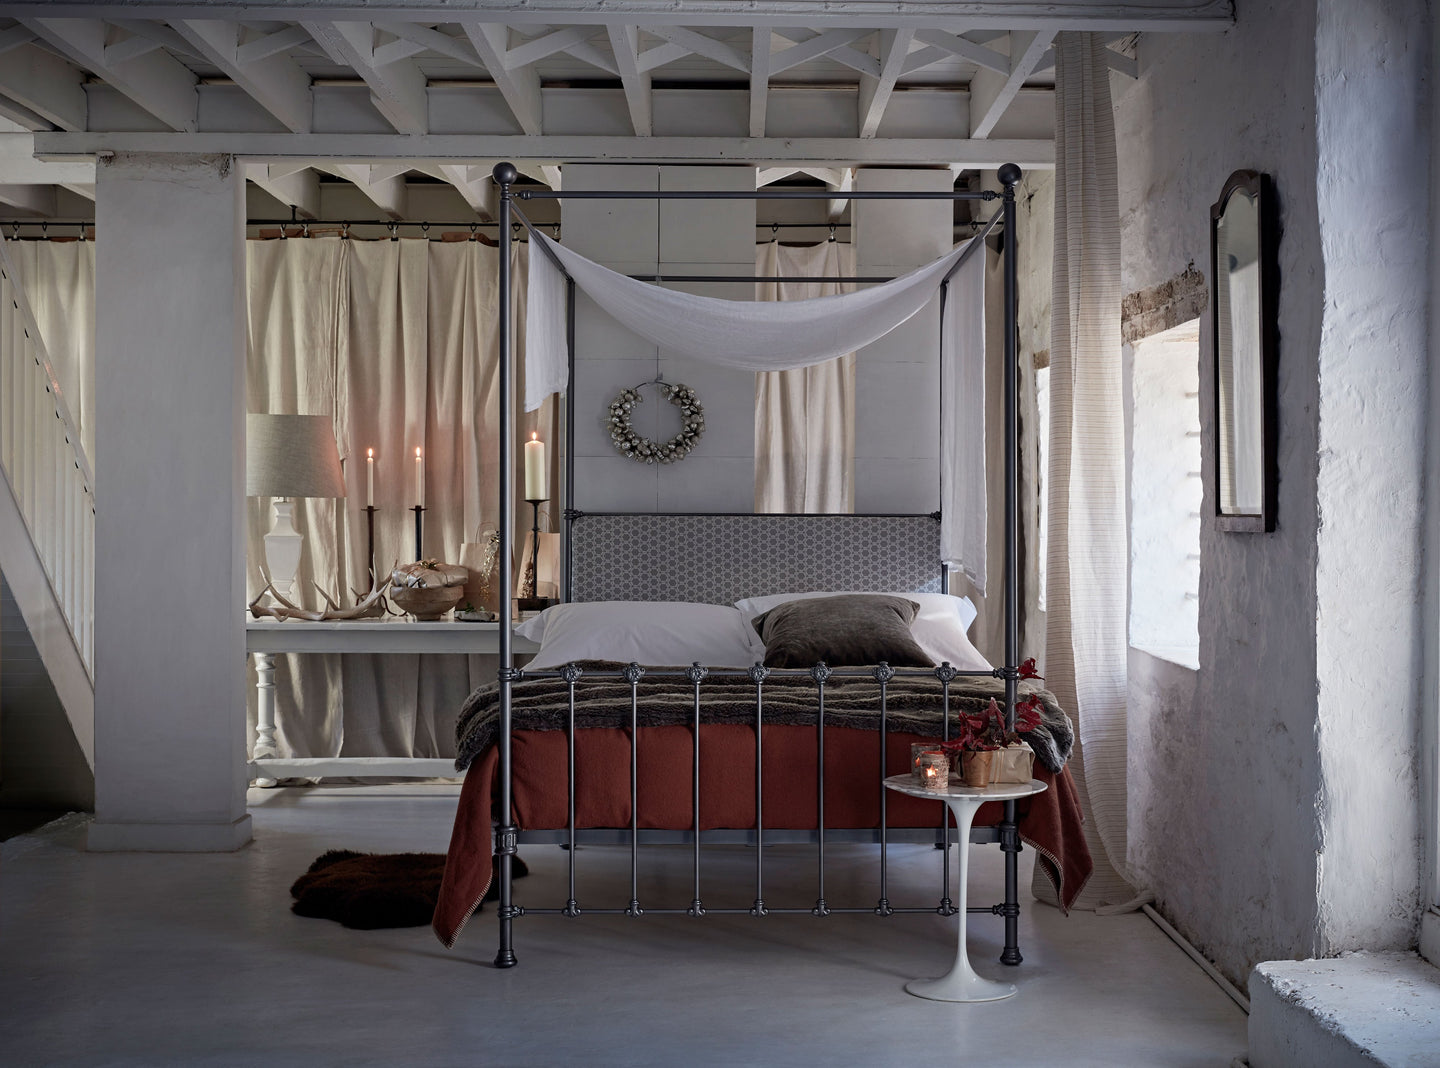 Five ways to dress a metal four-poster bed